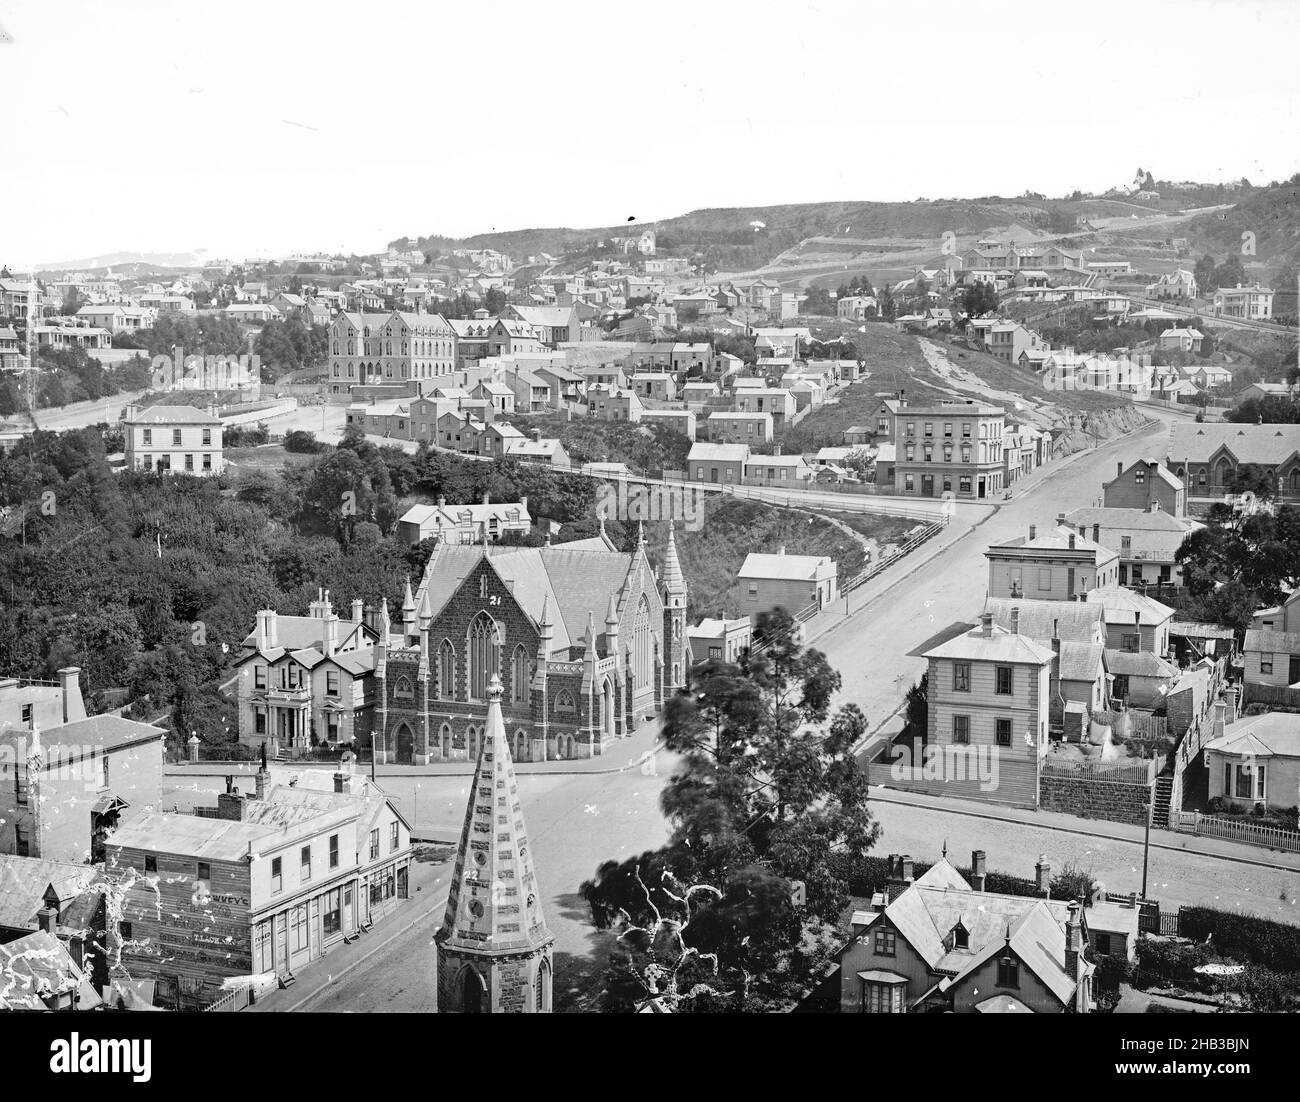 Dunedin, Burton Brothers studio, photography studio, 1870s, Dunedin, black-and-white photography, View from above looking along Stewart Street. Spire of the Church of England cathedral is visible in the foreground, church building in sight on street corner (at the site of the Fortune theatre Stock Photo